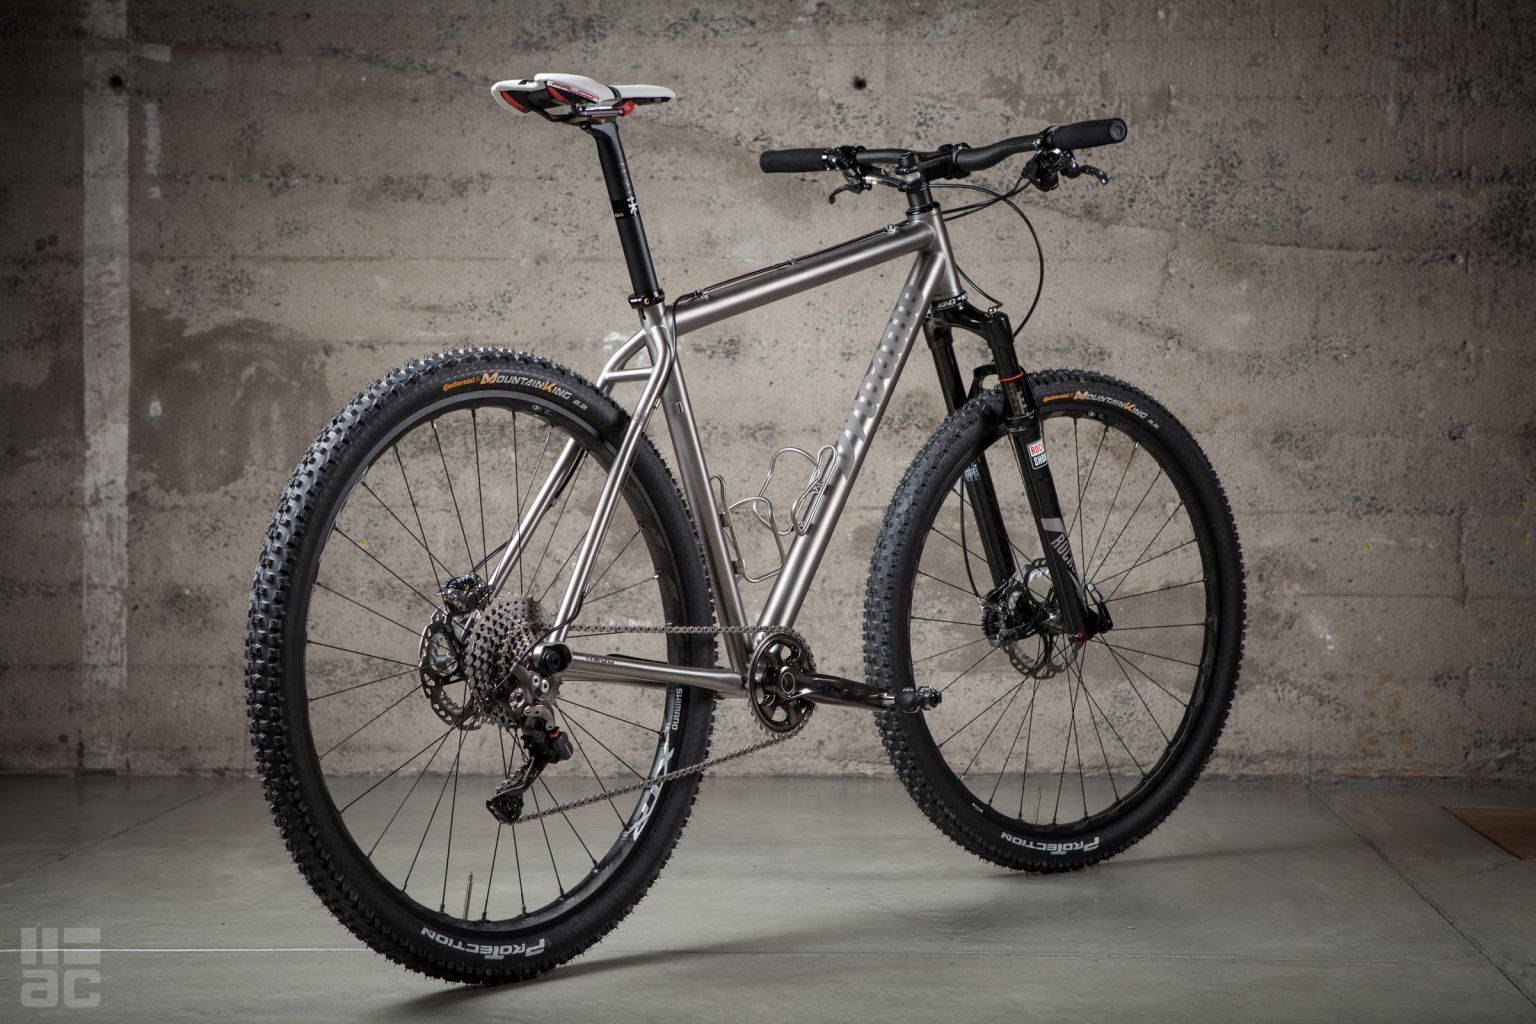 Gallery: An XTR-Equipped Mosaic MT-1